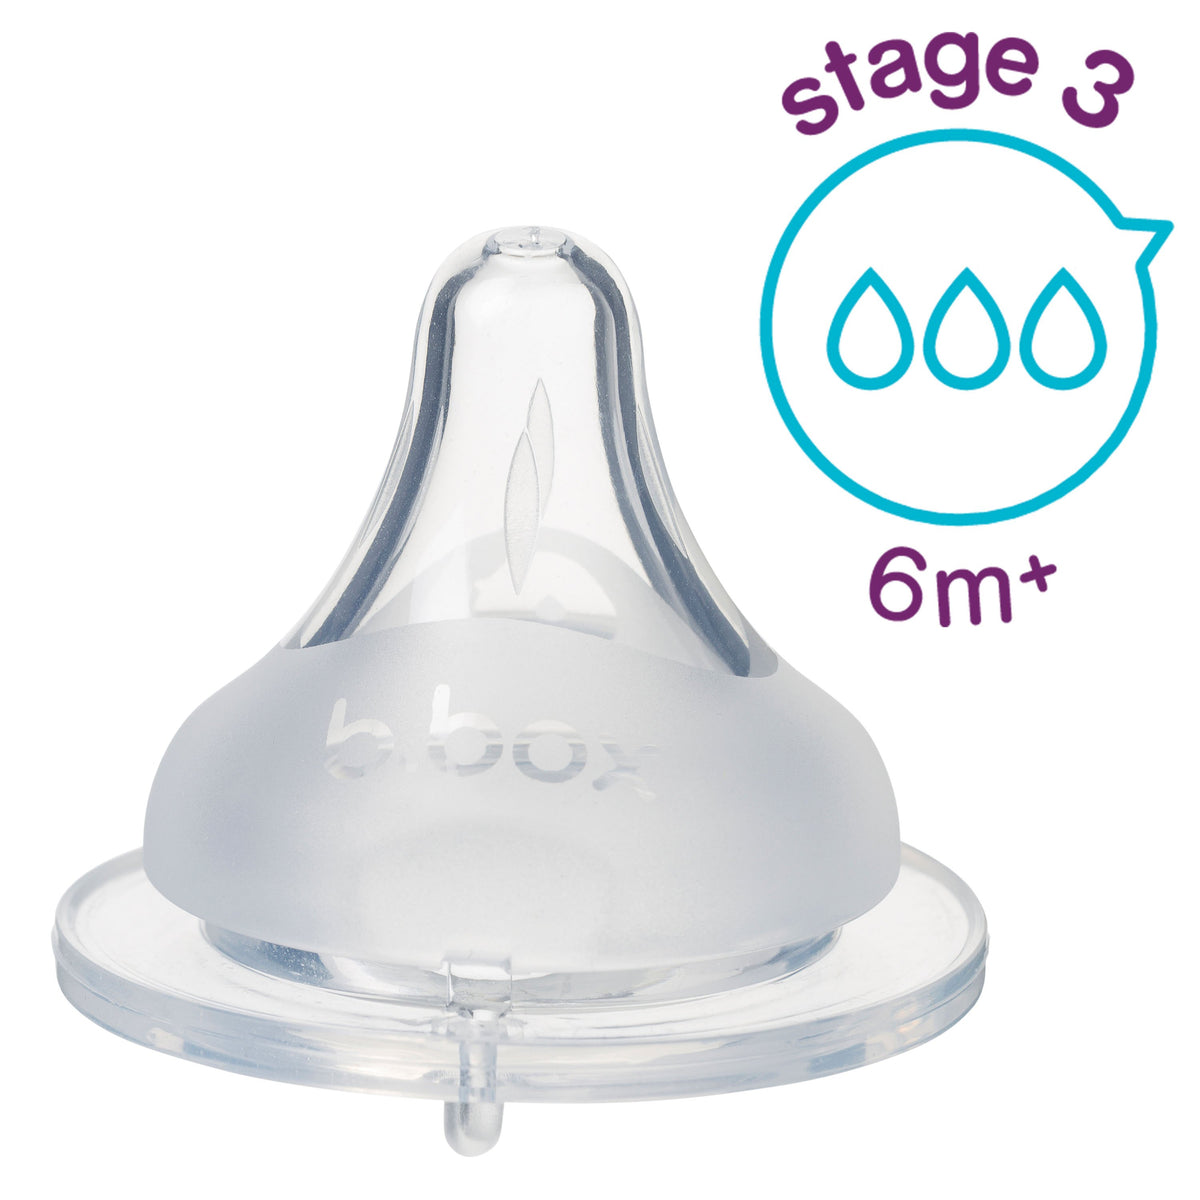 bbox-baby-bottle-anti-colic-teat-set-of-2-stage-3-6-month+- (1)